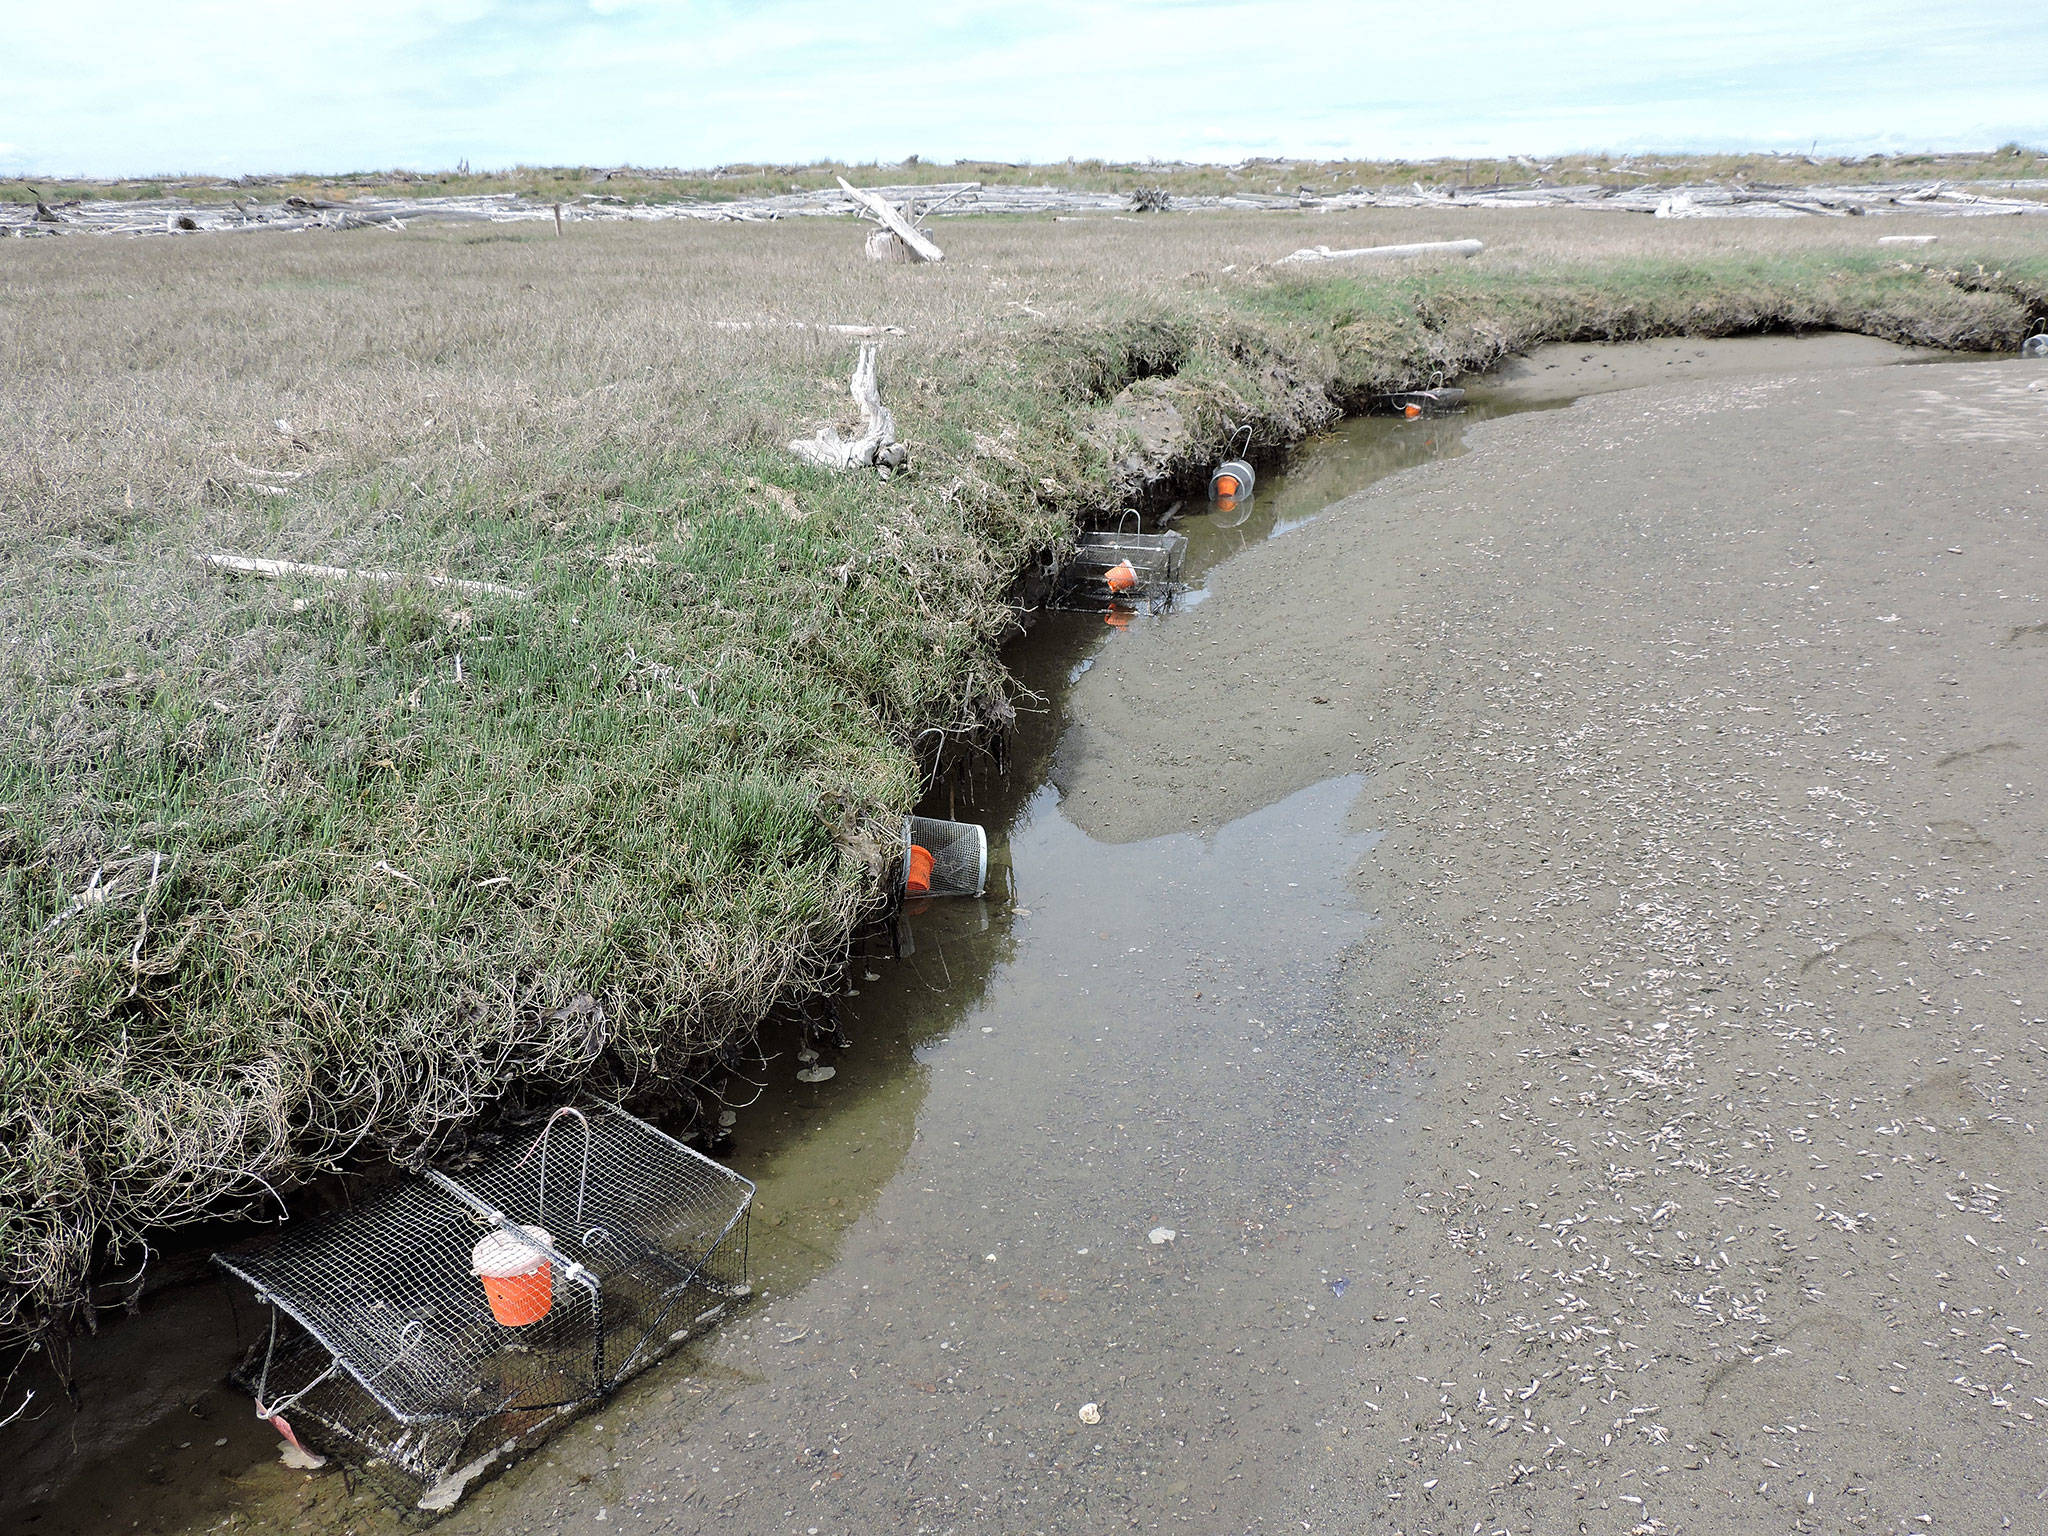 More than 100 traps have been placed on Dungeness Spit to capture European green crab, considered one of the worst invasive species on the planet by scientists. Photo courtesy of Lorenz Sollmann/ USFWS